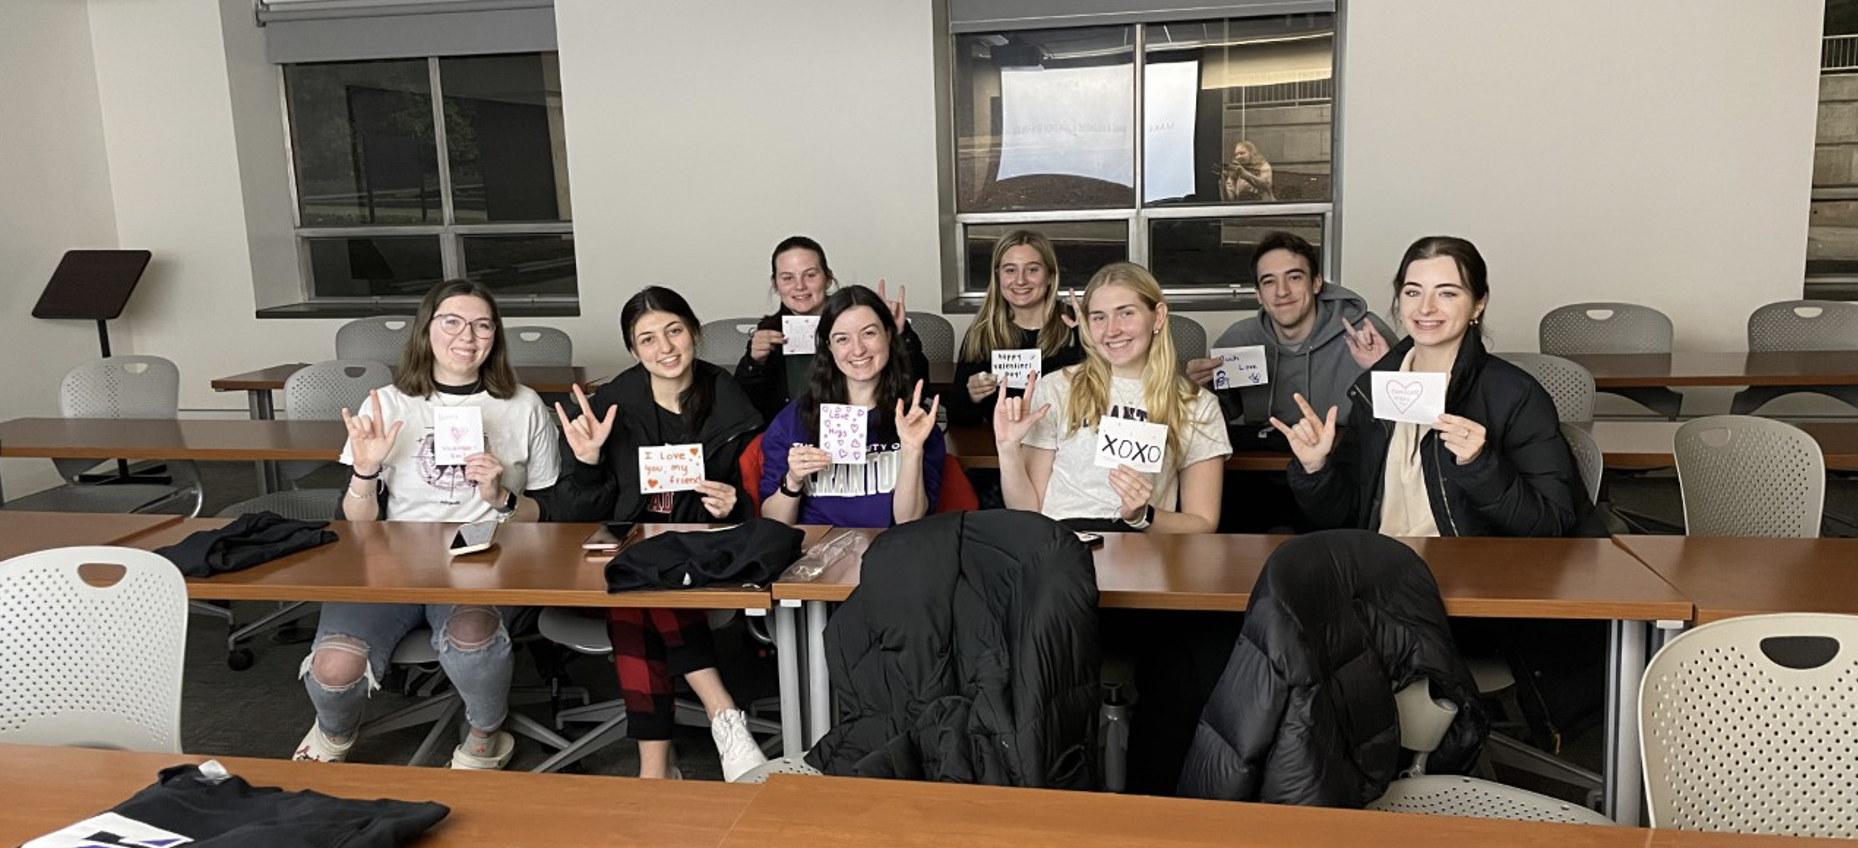 Royal Signers club members meet every Monday at 8 p.m. in Loyola Science Center. According to Club President Julia Higgins, members regularly perform songs in American Sign Language and reflect on Deaf culture in the media and current events.